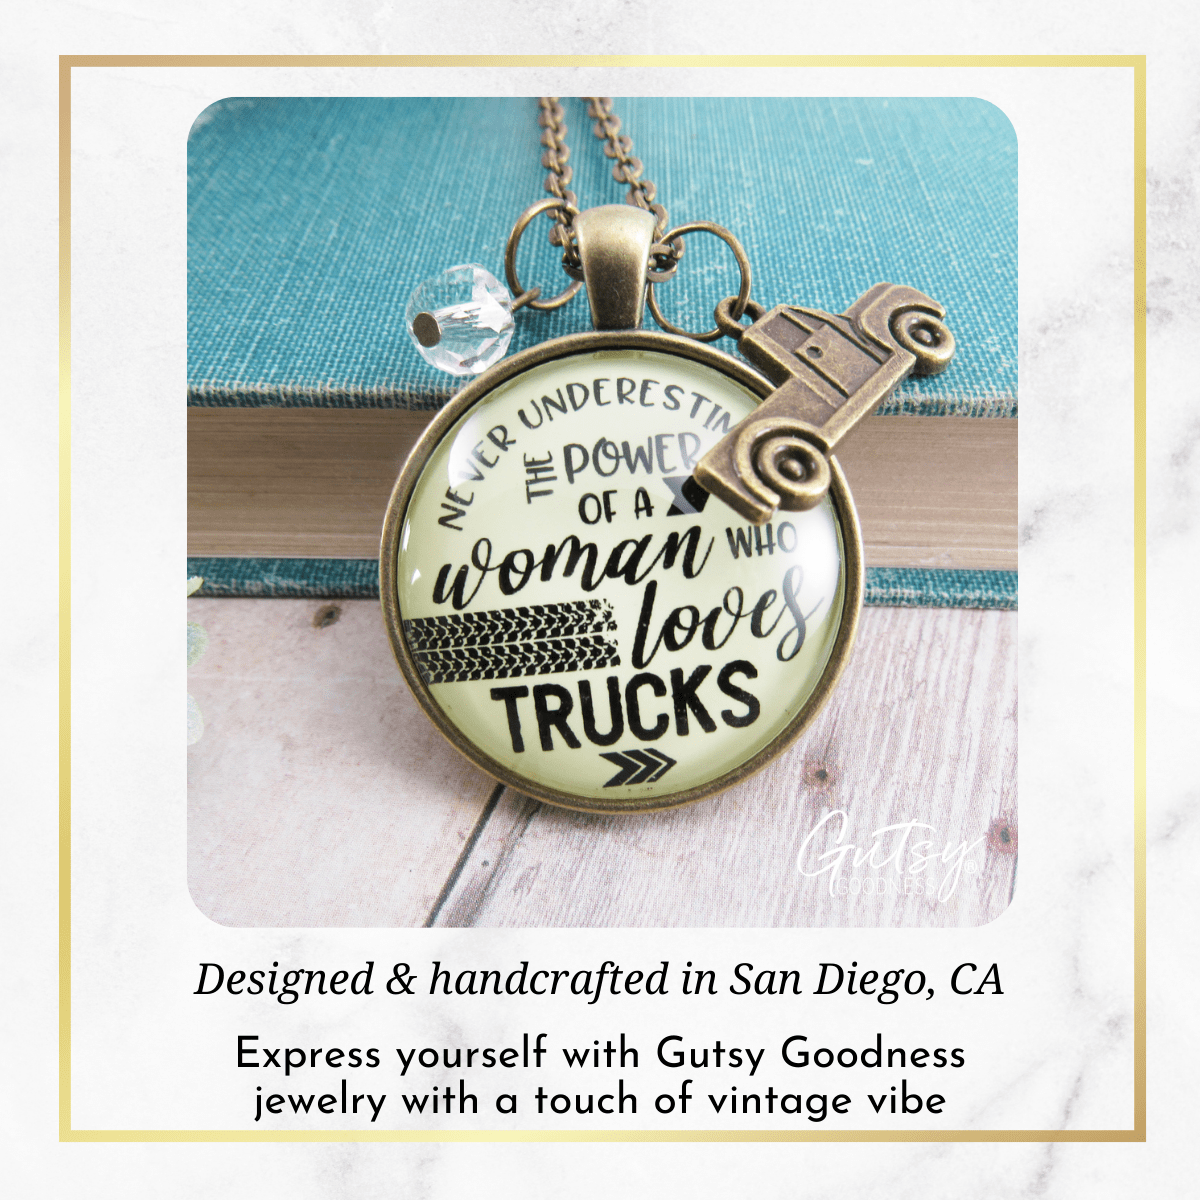 Gutsy Goodness Truck Charm Necklace Never Underestimate Woman Loves Country Jewelry - Gutsy Goodness Handmade Jewelry;Truck Charm Necklace Never Underestimate Woman Loves Country Jewelry - Gutsy Goodness Handmade Jewelry Gifts